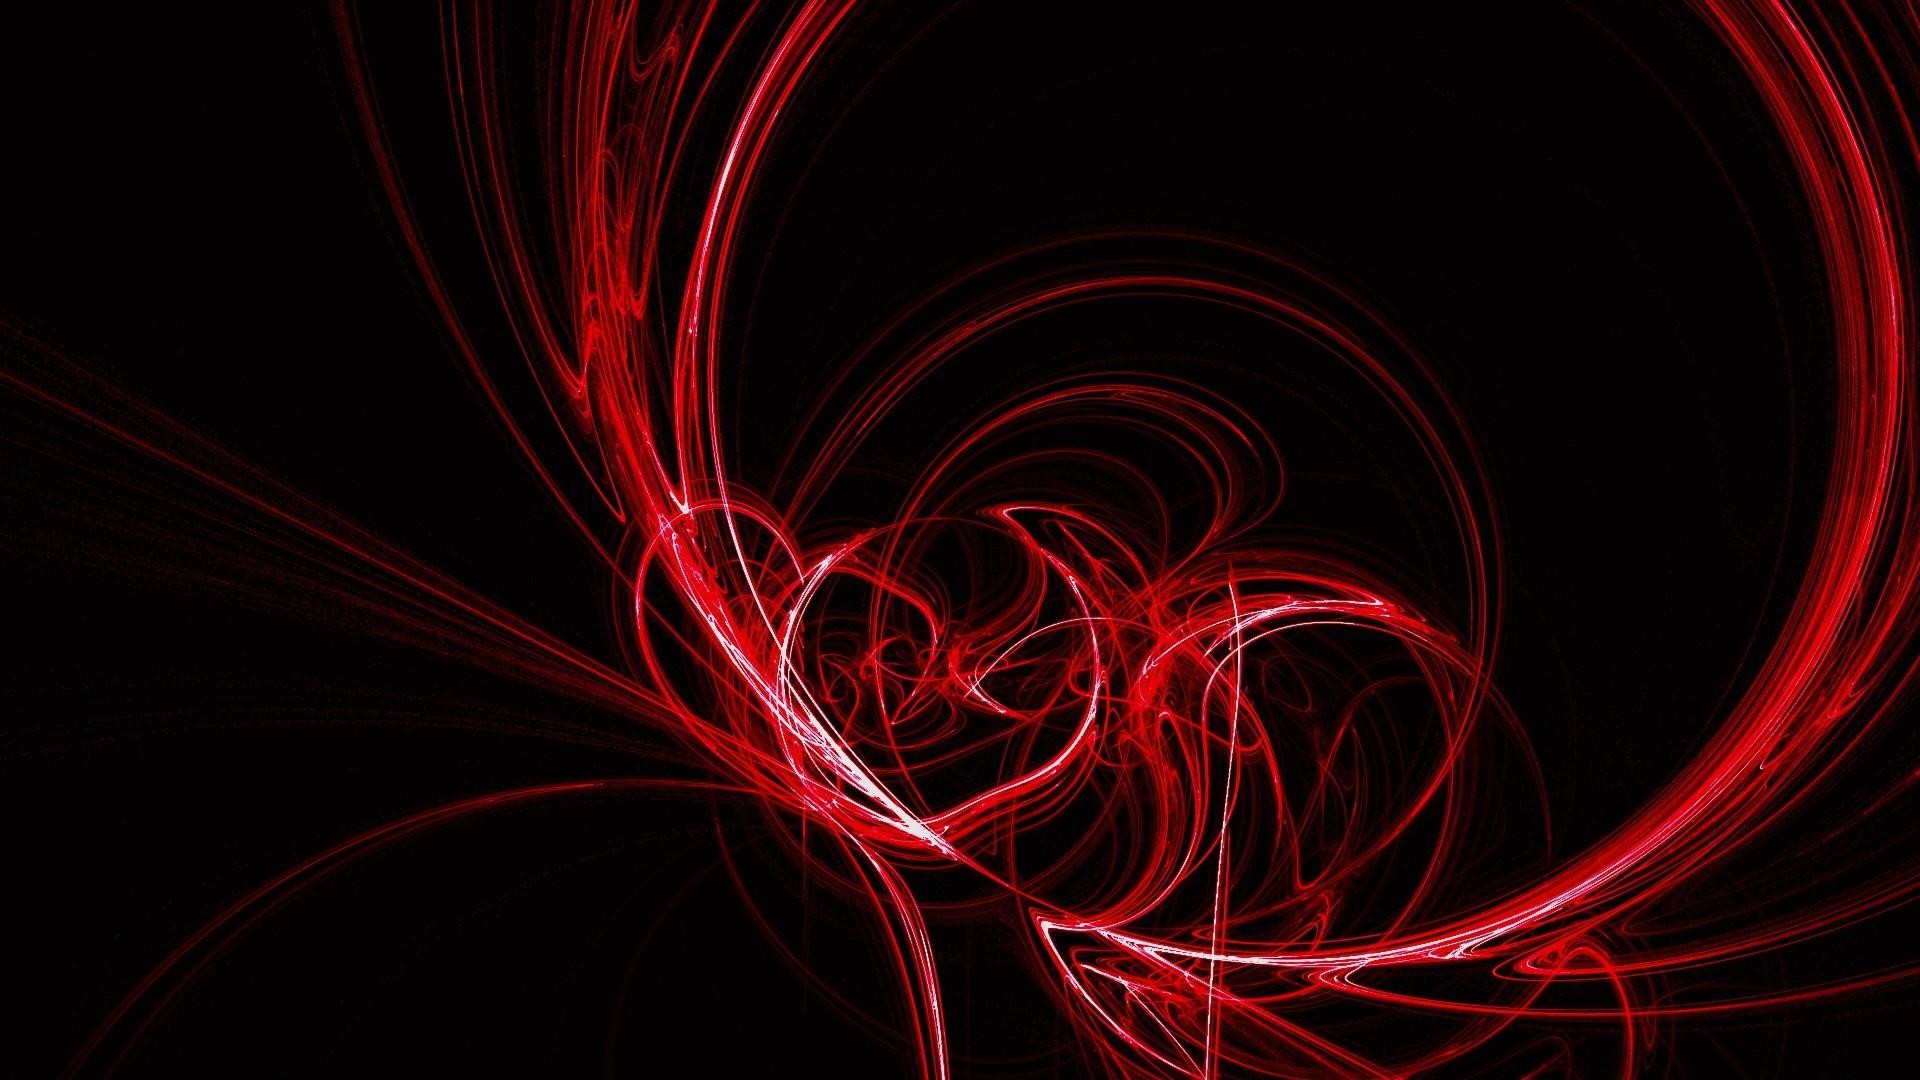 1920x1080 Red Abstract Artwork Wallpaper 28438